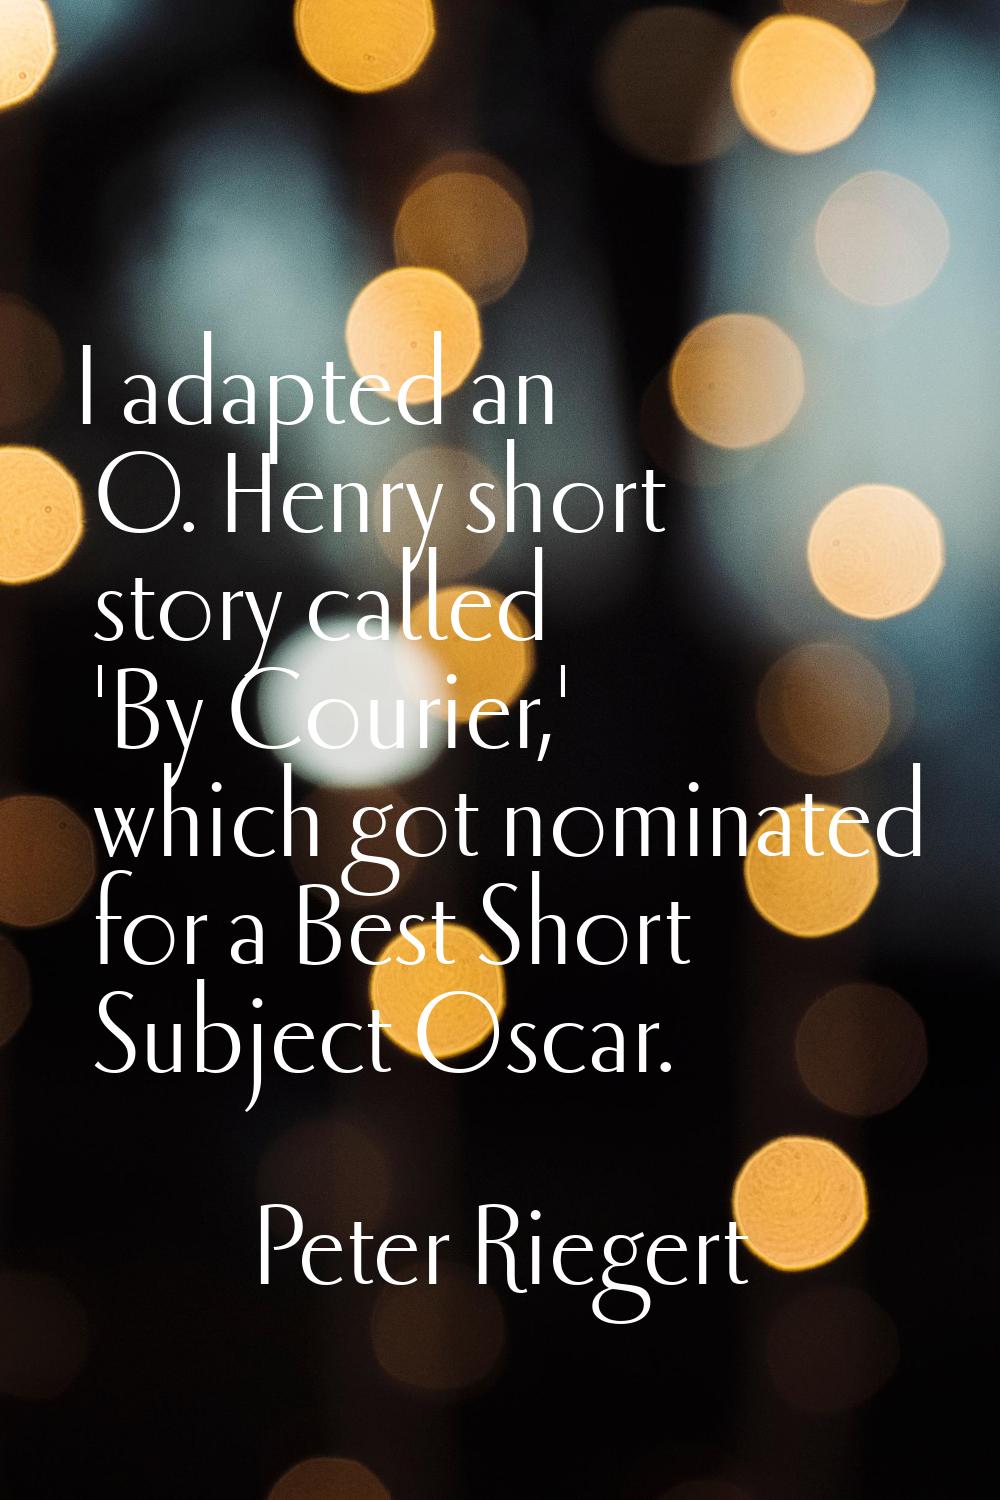 I adapted an O. Henry short story called 'By Courier,' which got nominated for a Best Short Subject